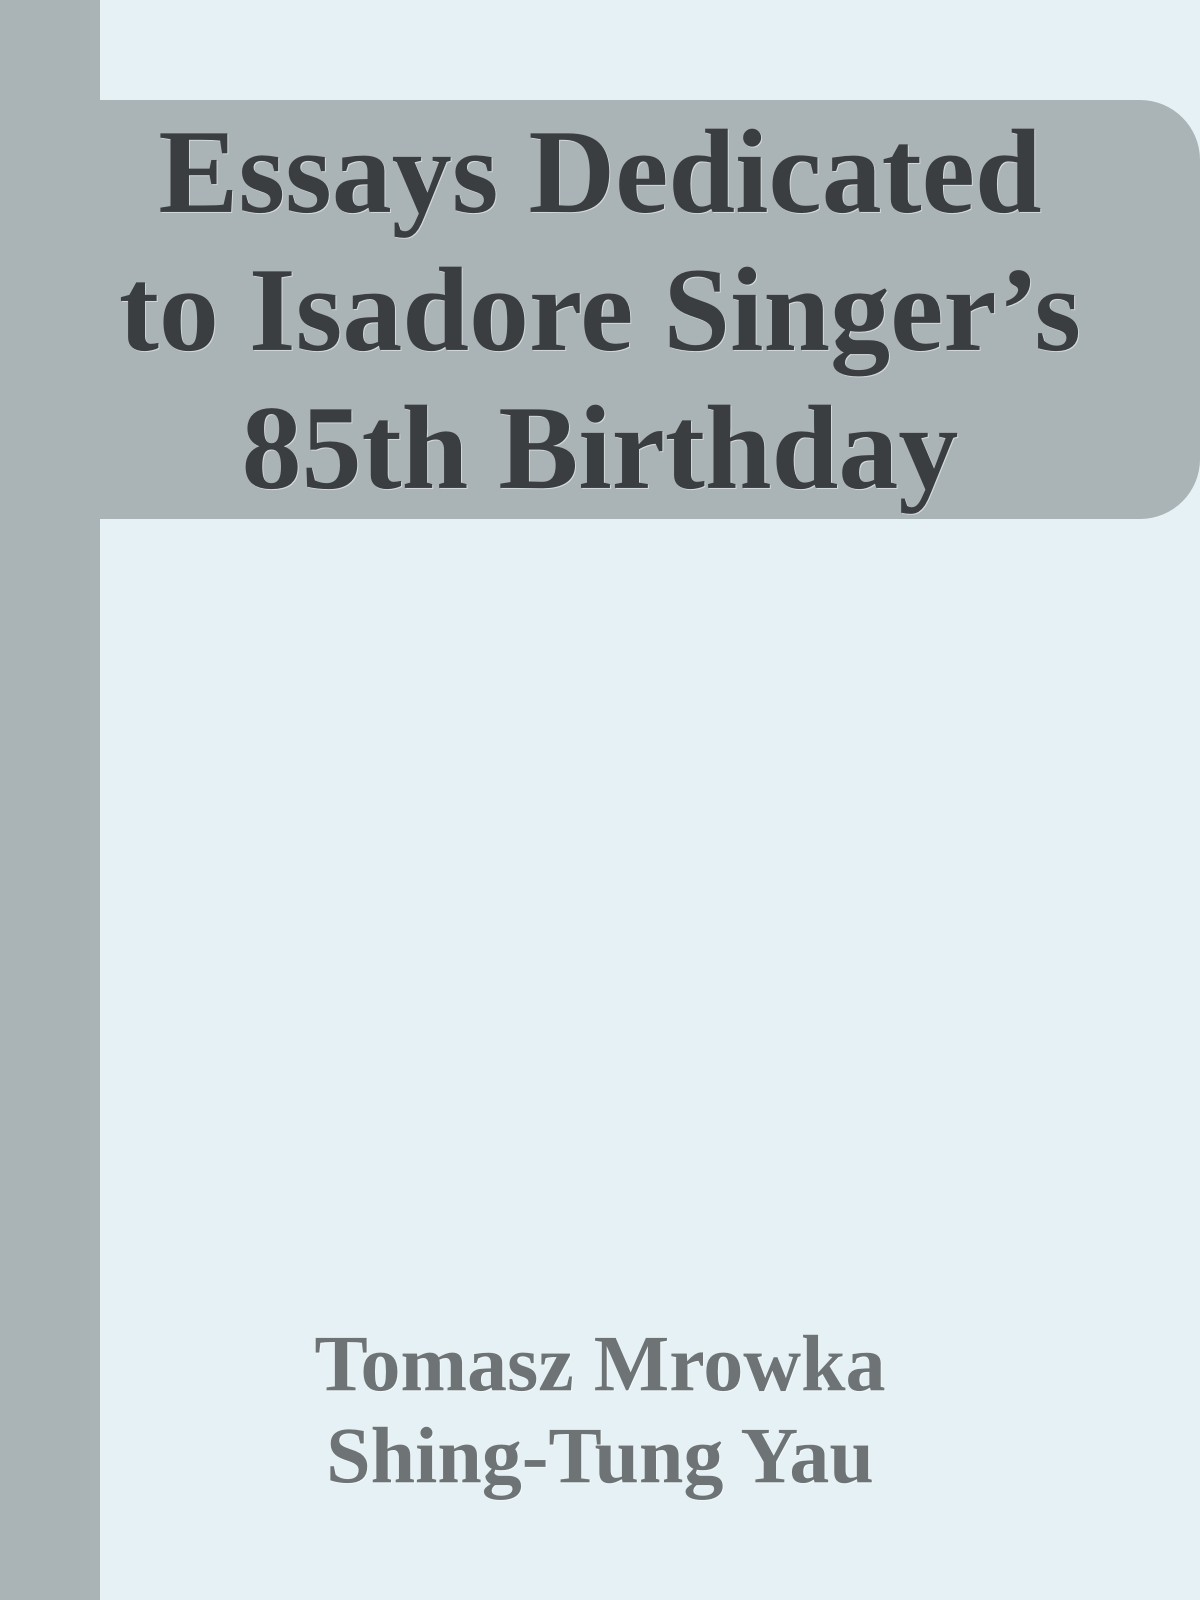 Essays Dedicated to Isadore Singer’s 85th Birthday